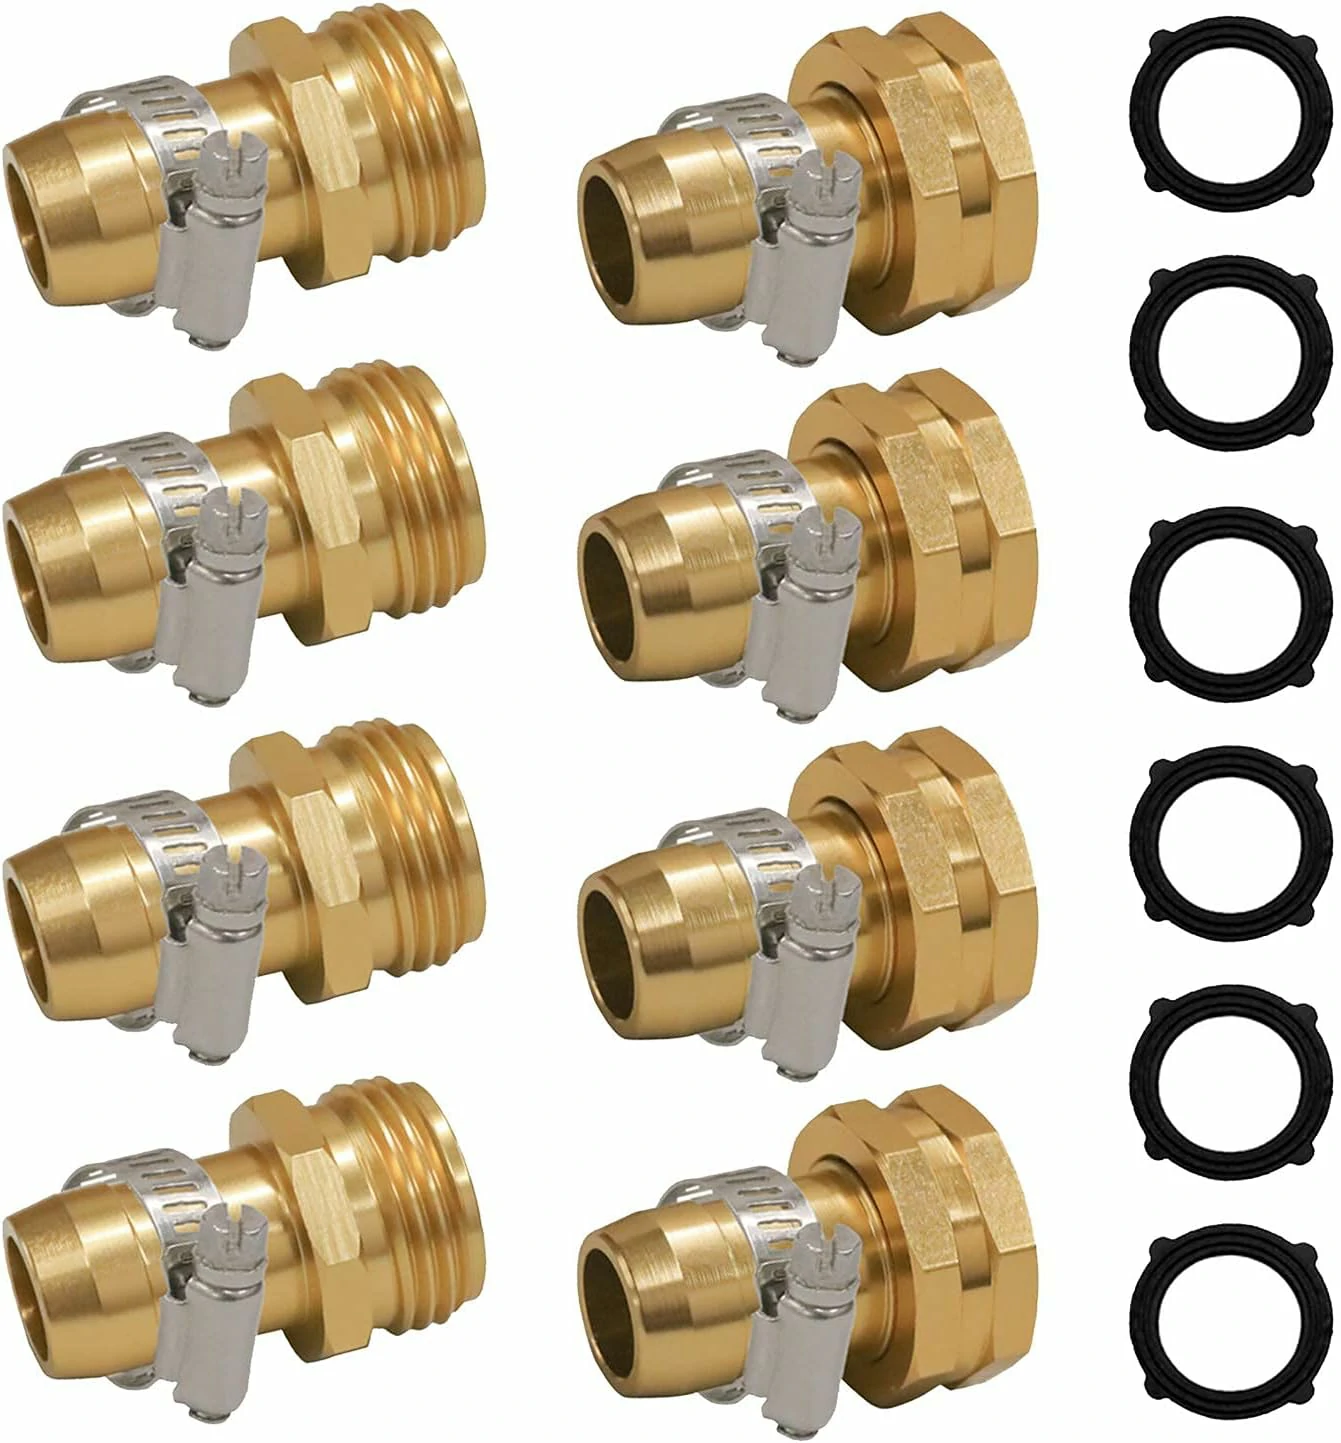 EVEAGE Garden Hose Repair Connector with Clamps